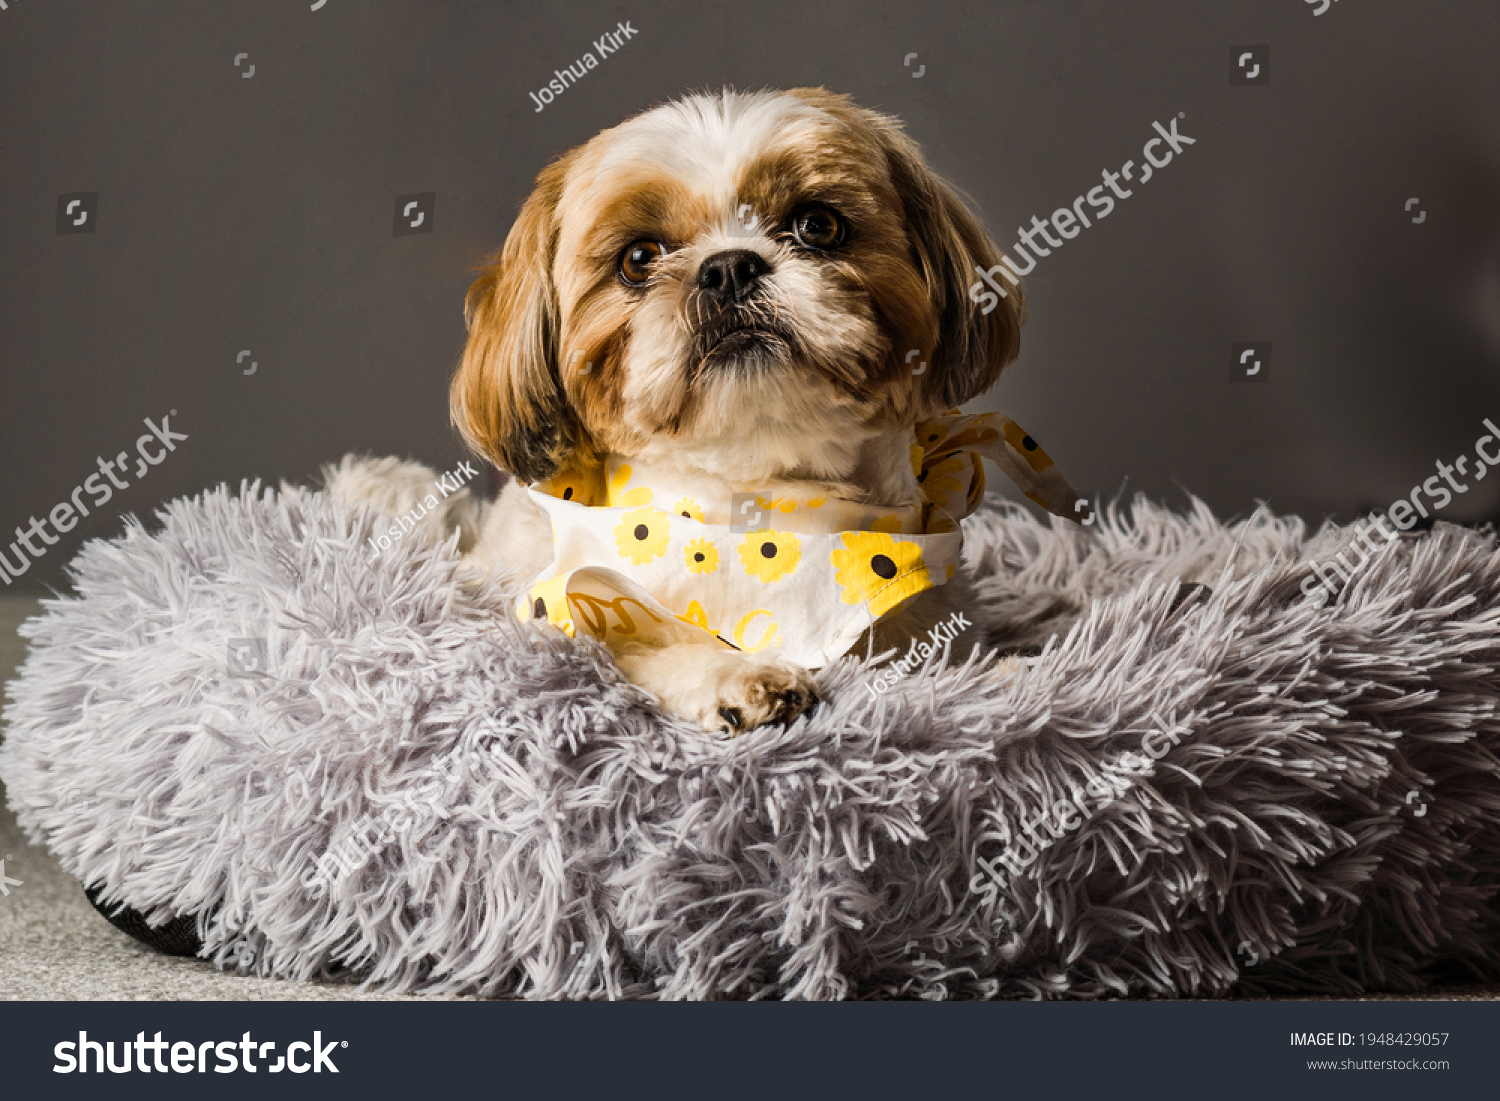 pet shih tzu in dog bed looking cute and fluffy with flower collar neckerchief bandana  #1948429057